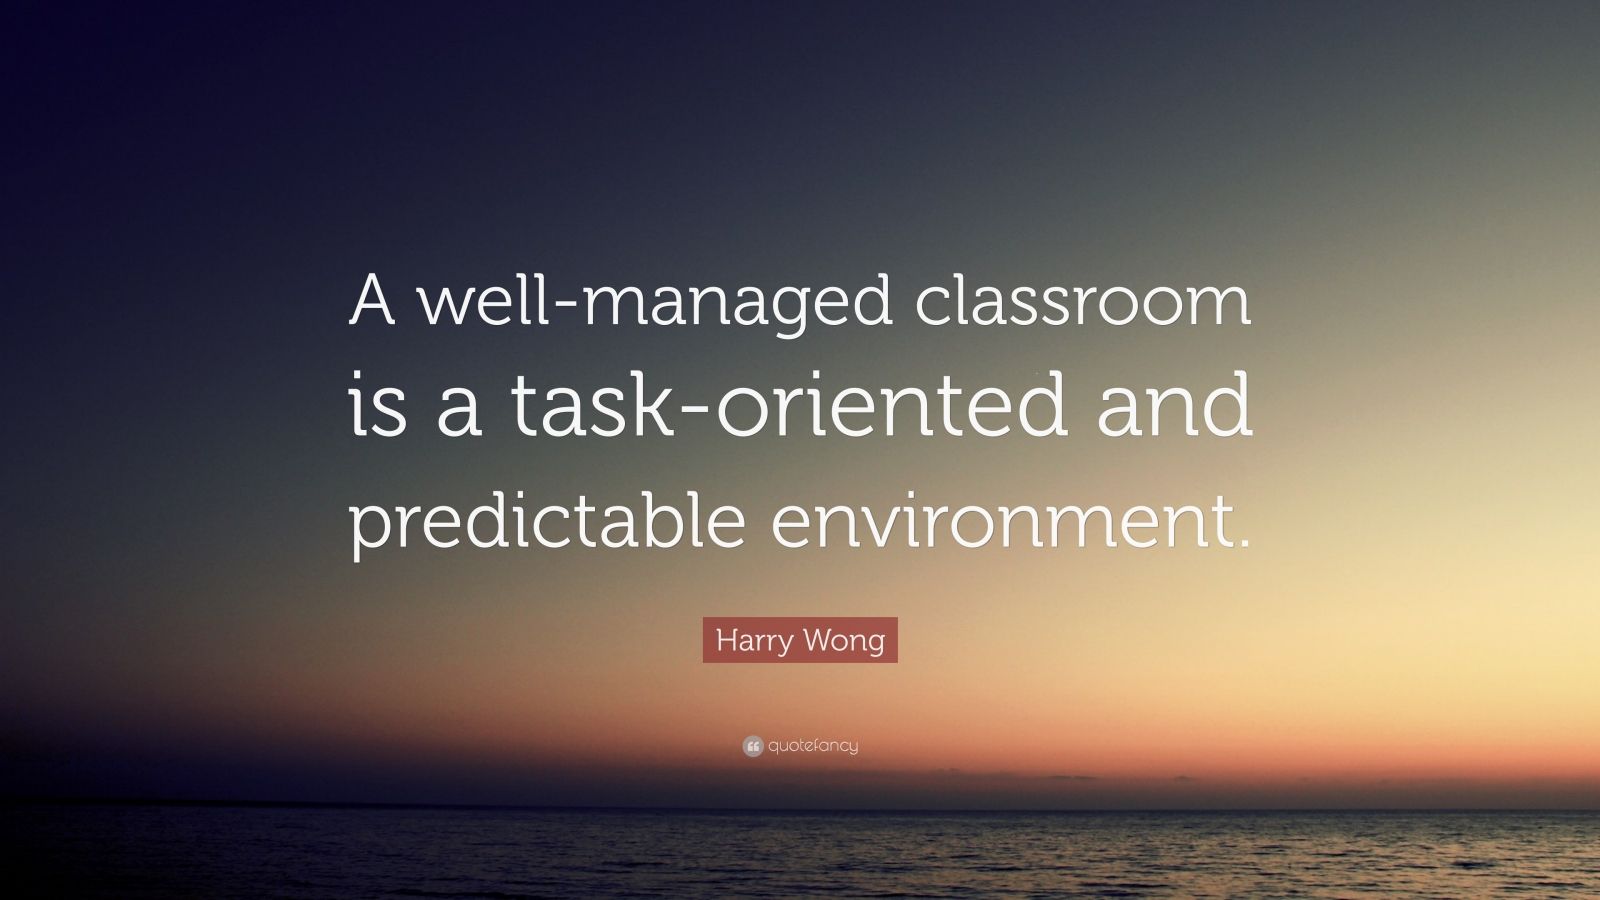 Harry Wong Quote: "A well-managed classroom is a task-oriented and predictable environment." (7 ...